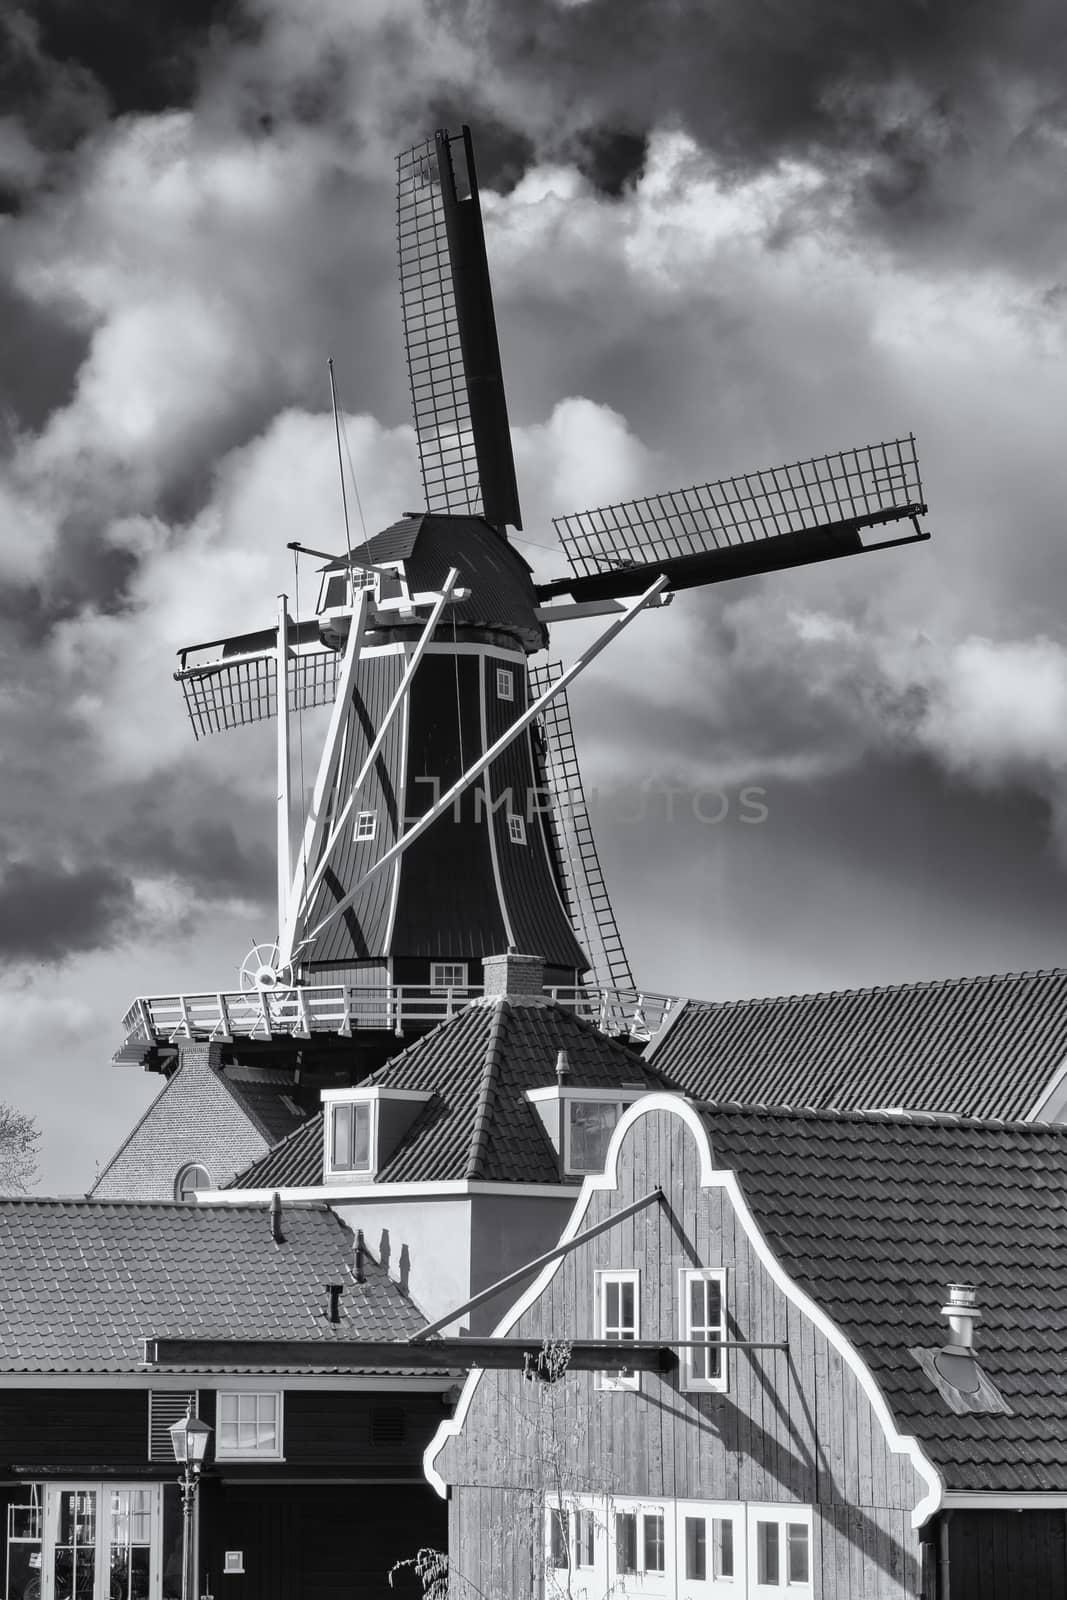 Old windmill in the city center of Haarlem, Netherlands